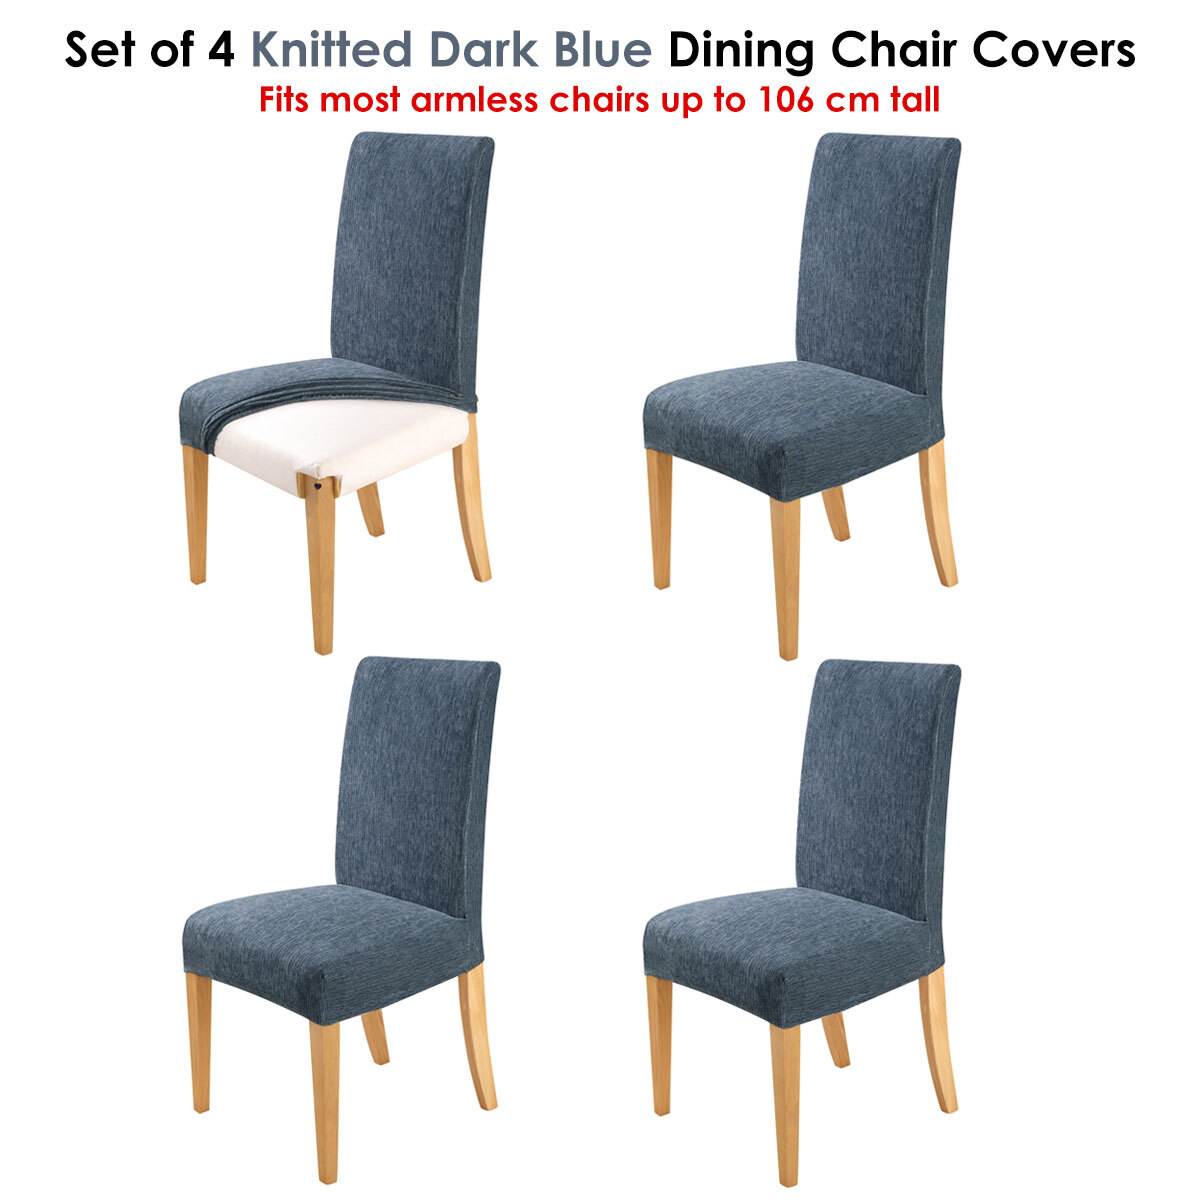 Home Innovations Set of 4 Easy Fit Stretch Dining Chair Covers Knitted – Dark Blue